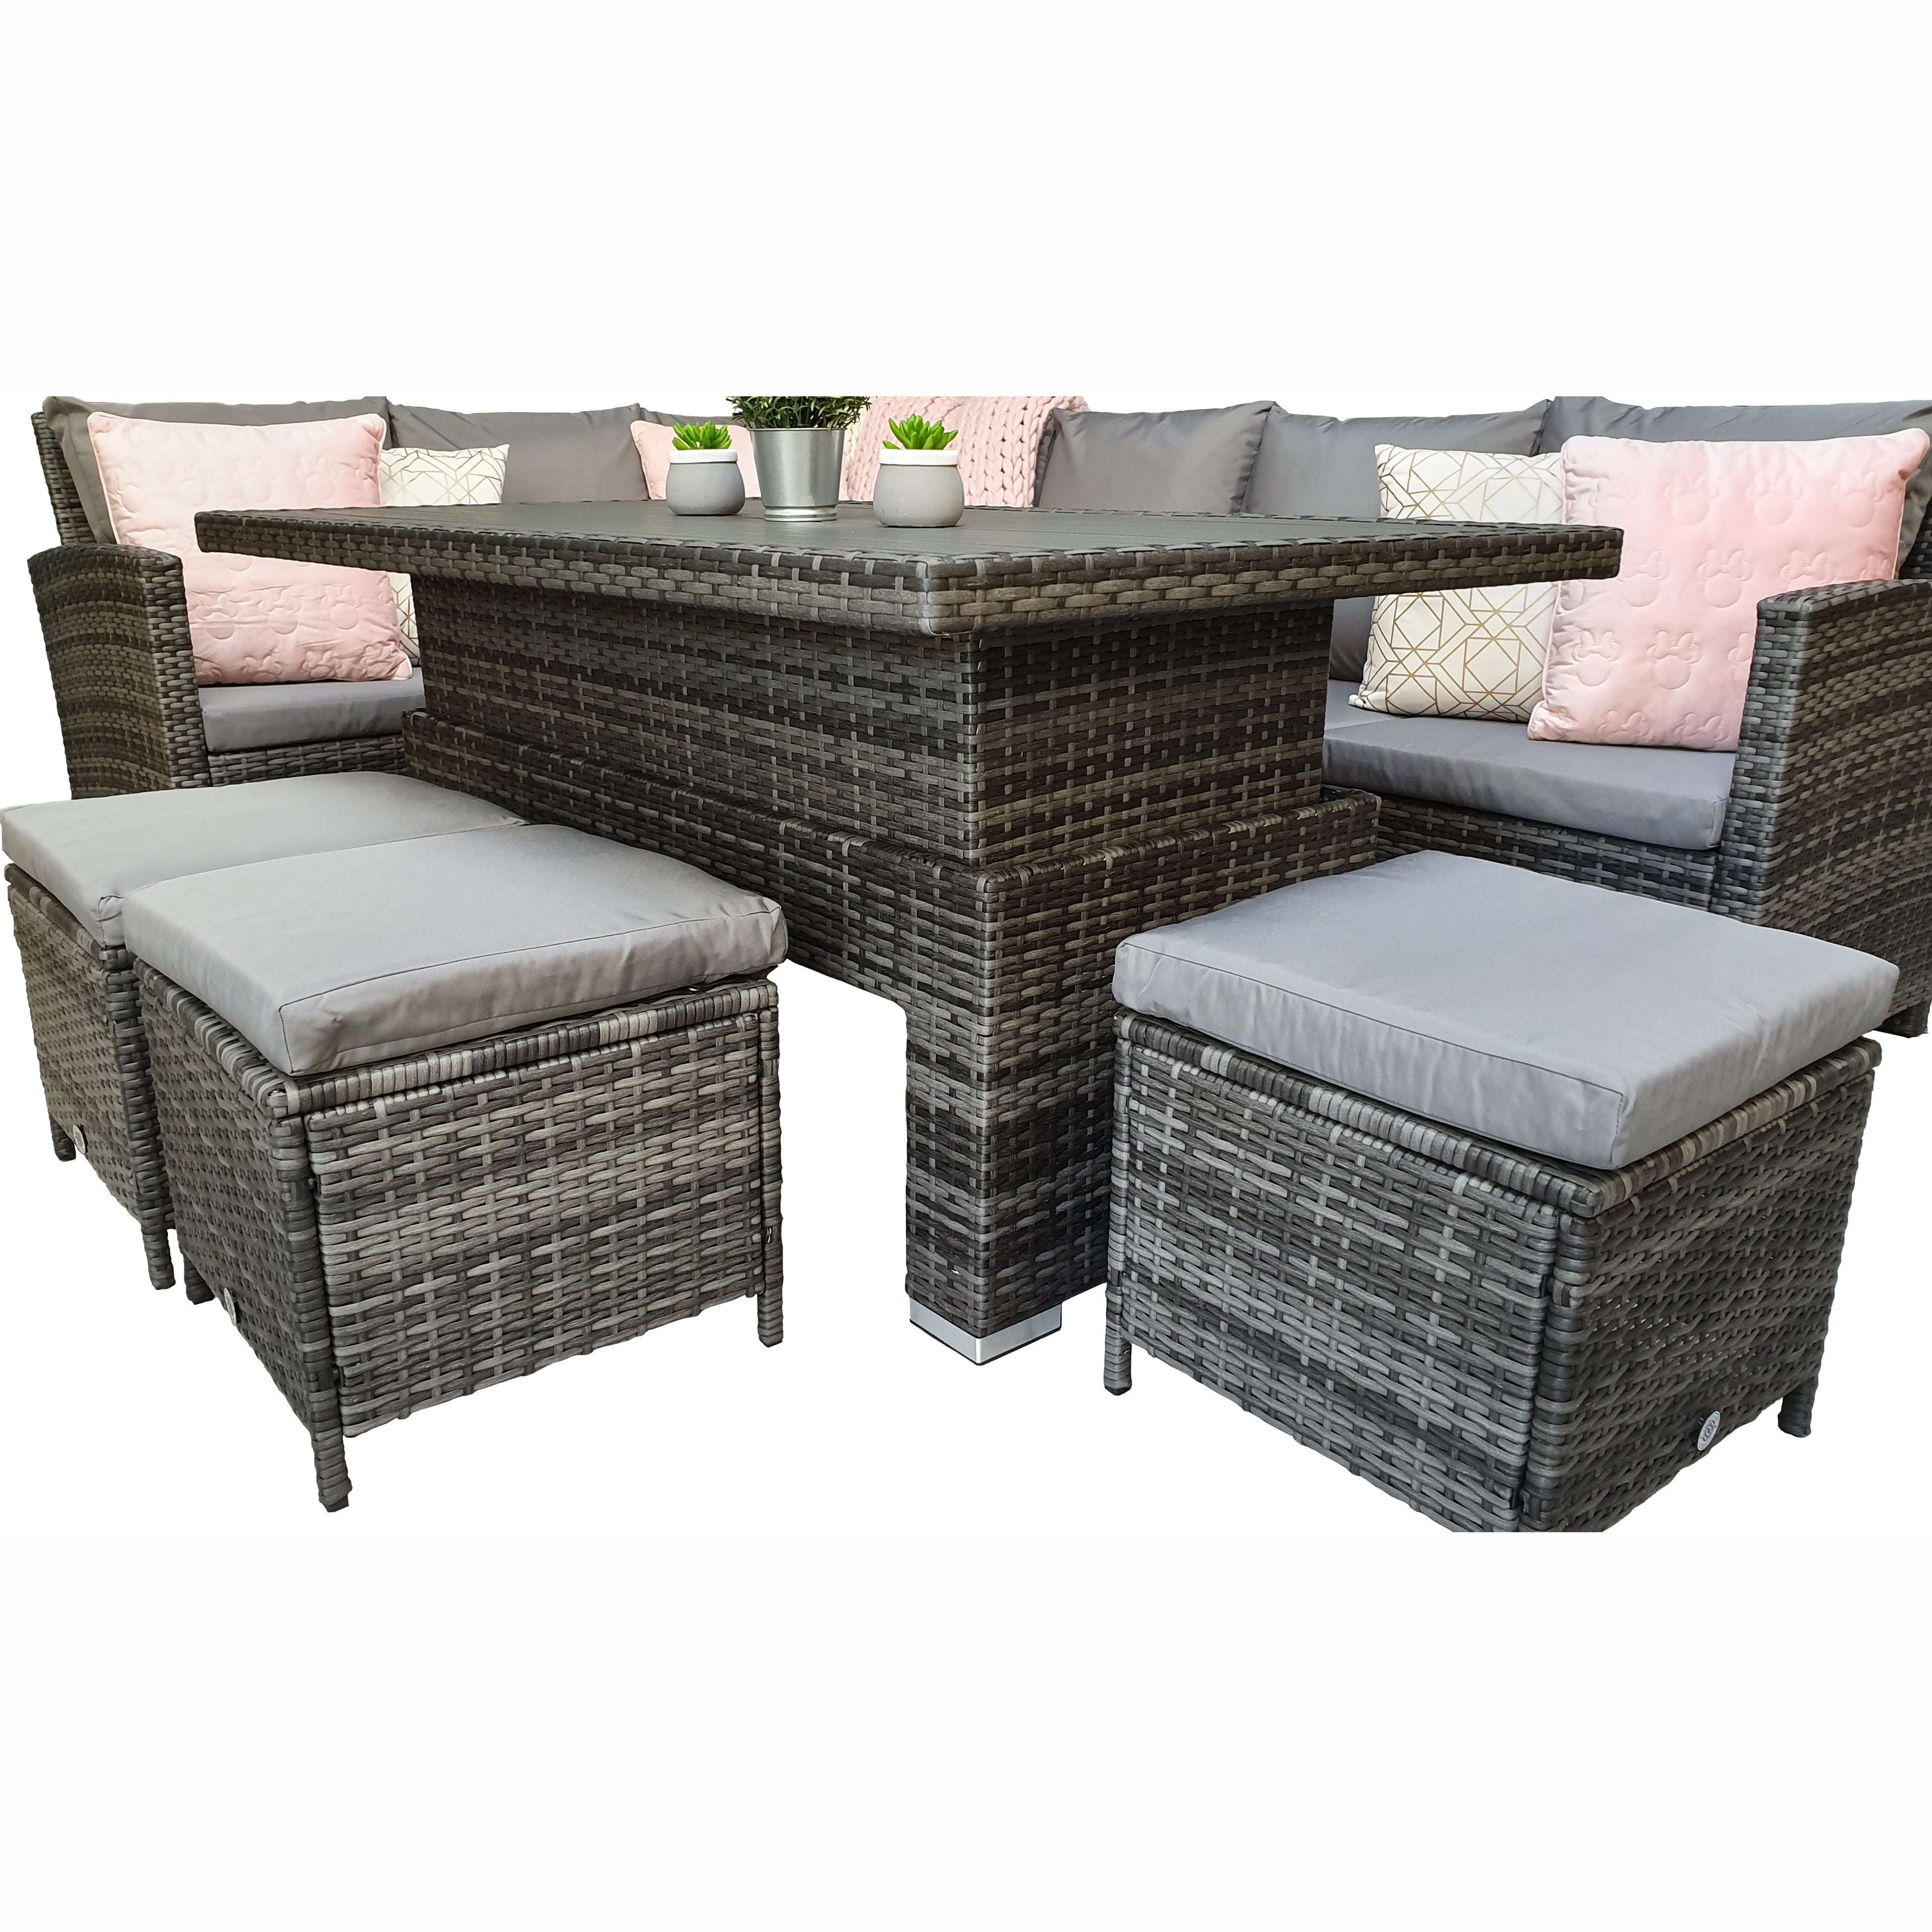 Exceptional Garden:Signature Weave Charlotte Corner Dining Set with Lifting Table